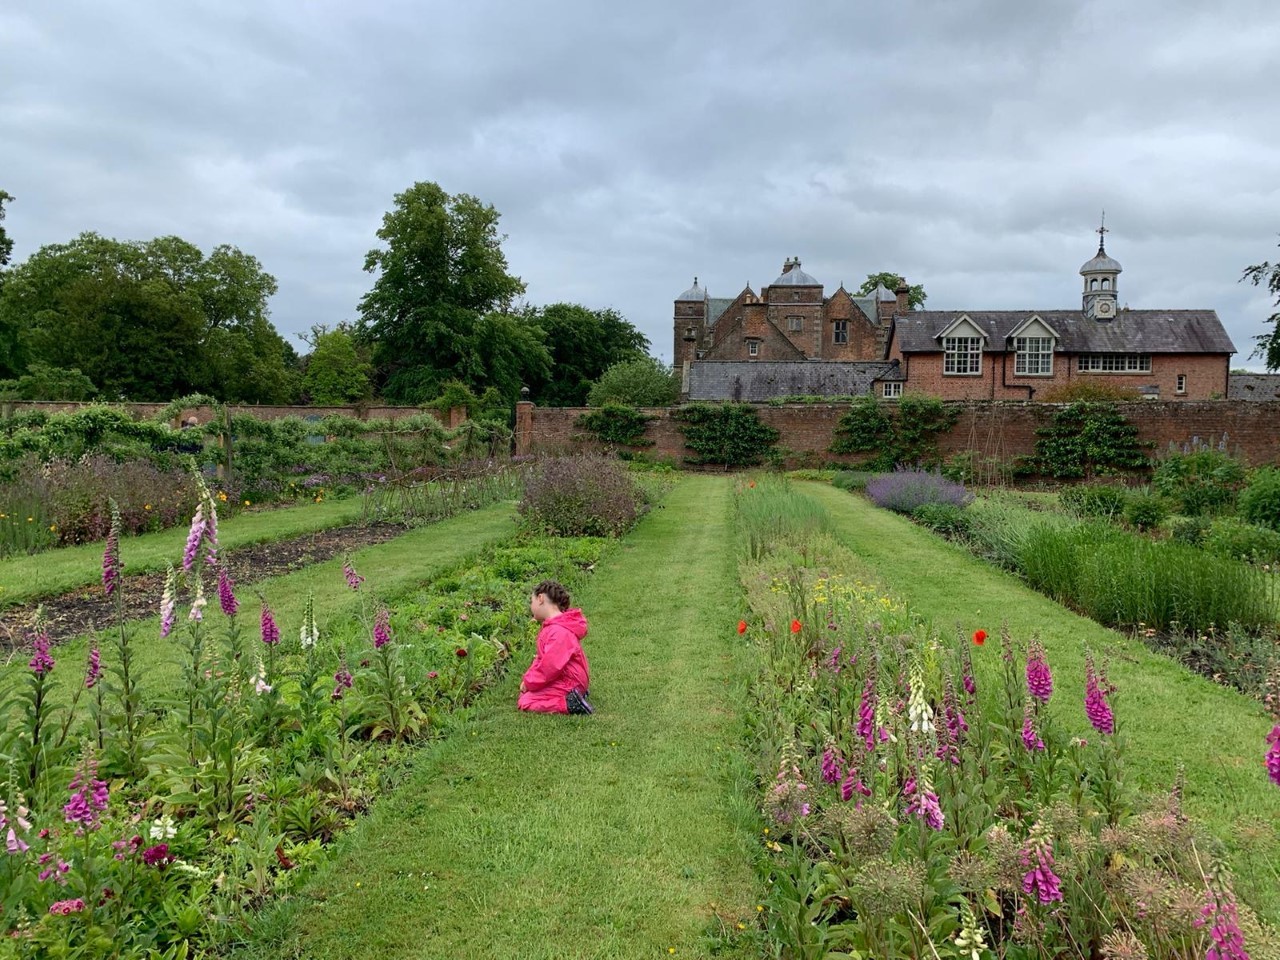 Kiplin’s walled garden and 90 acres of park land are due to reopen on Monday, March 29 just in time for the Easter holiday. The walled garden produces fruit and vegetables for the tea room recipes and is carefully looked after by a large team of